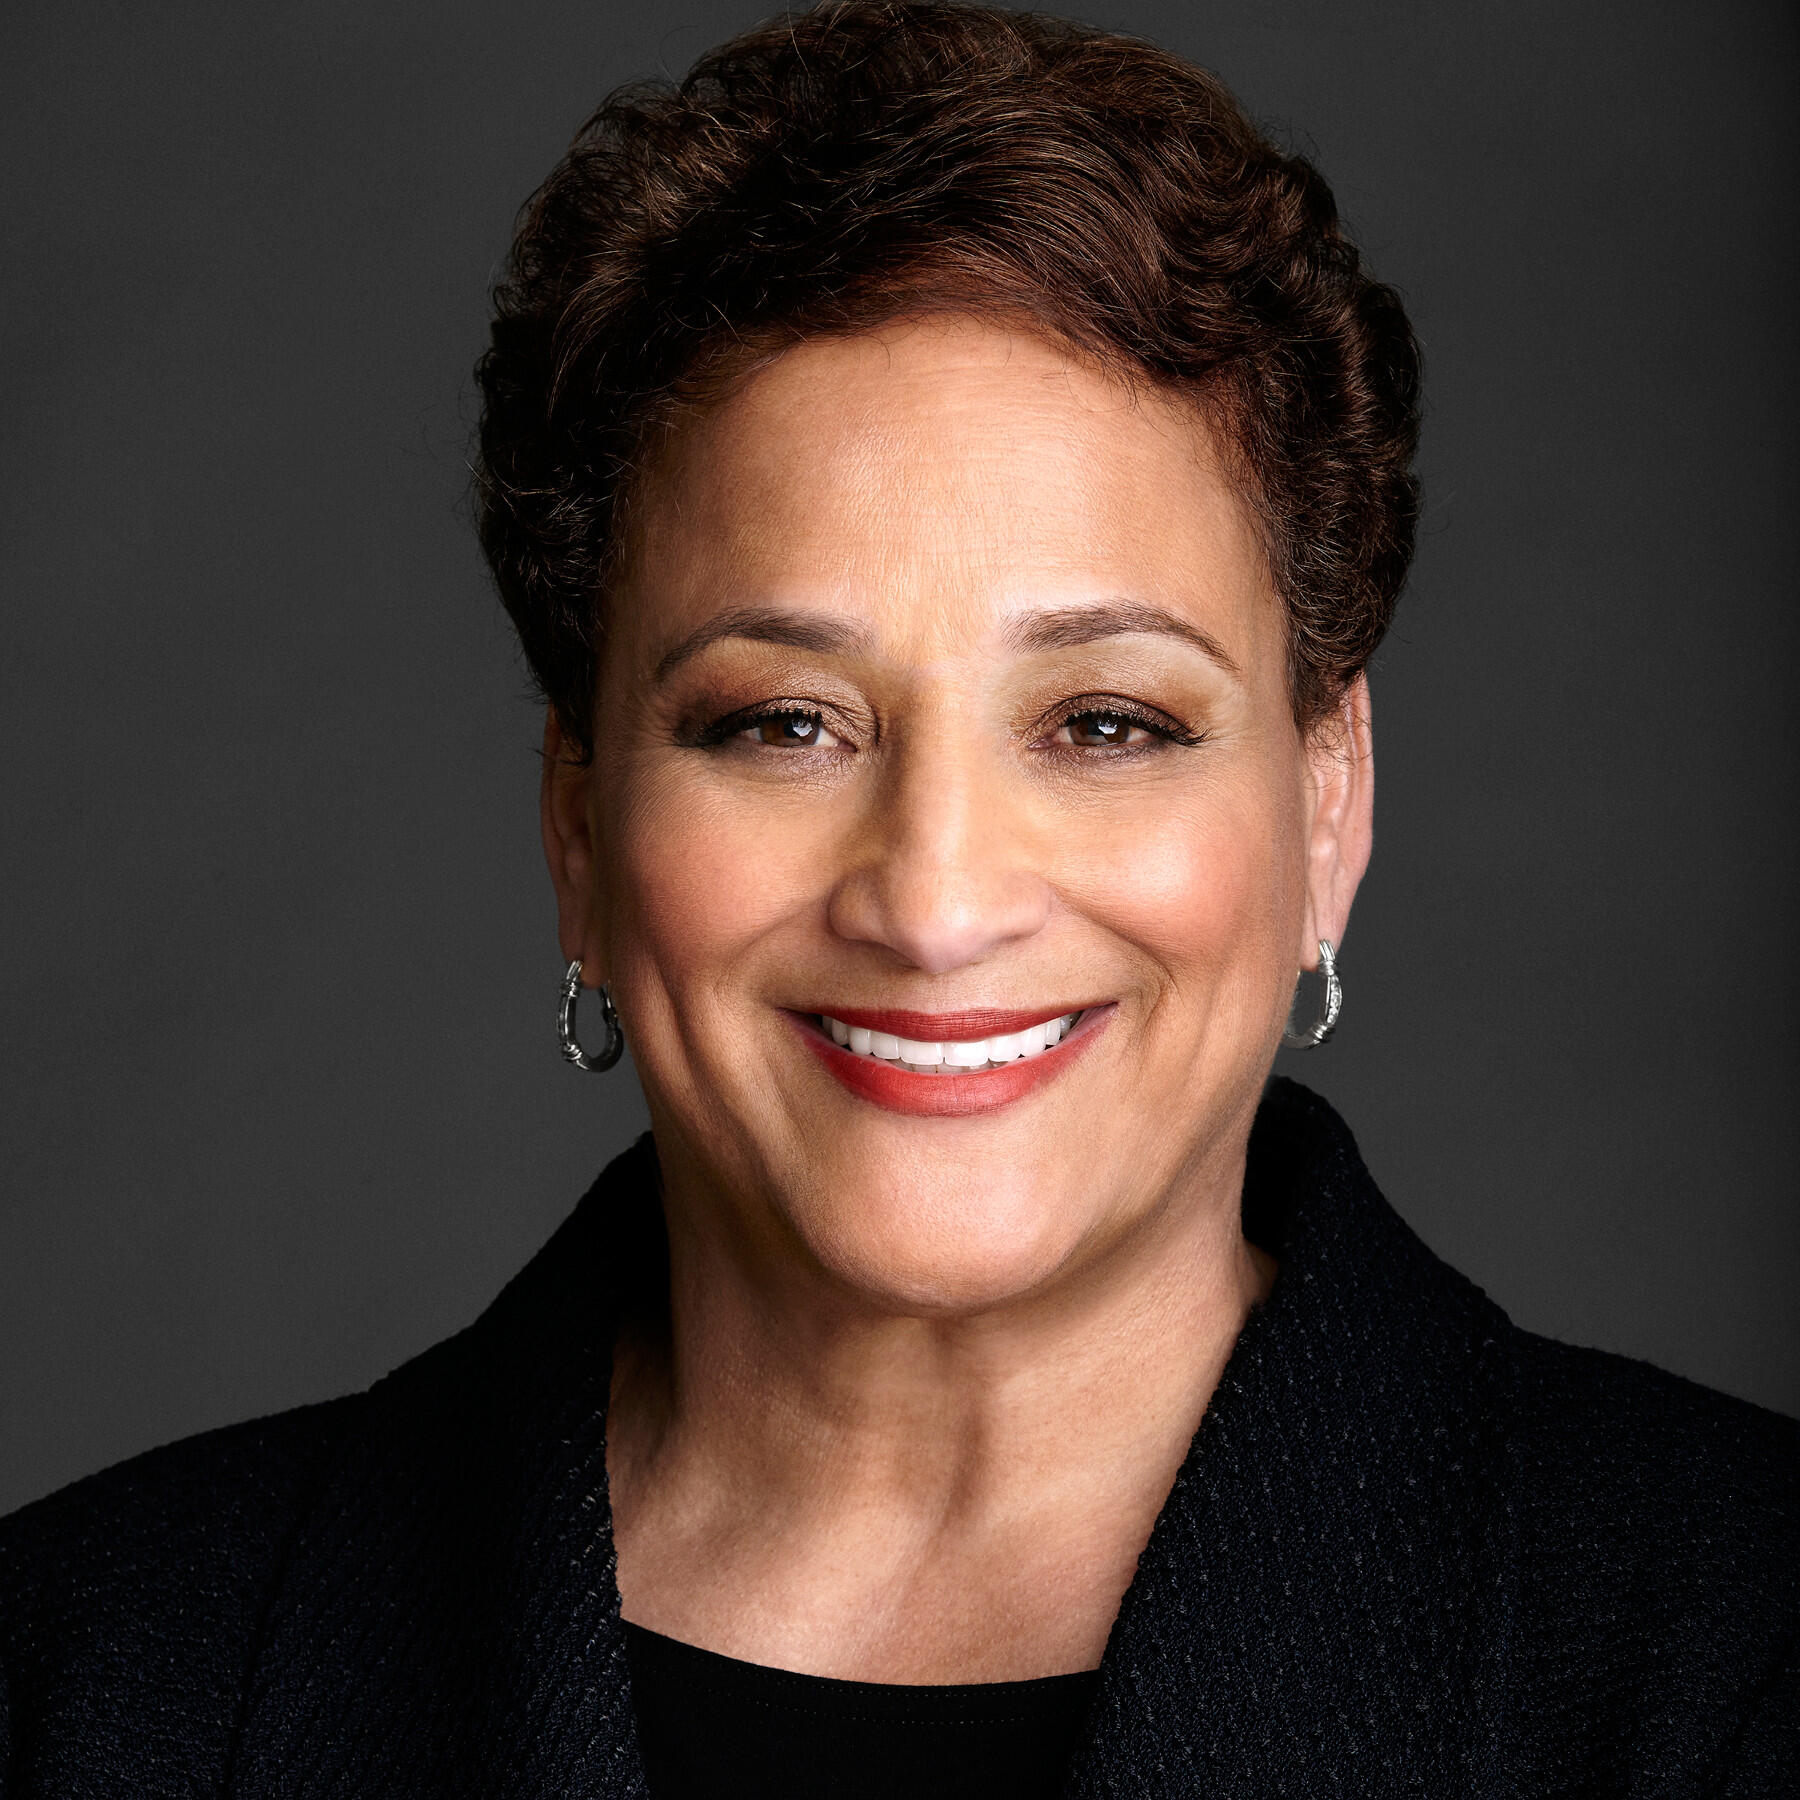 Jo Ann Jenkins, CEO of AARP, will present "The Business of Boomers" at the VCU School of Business' upcoming Investors Circle event. (Photo courtesy VCU School of Business)